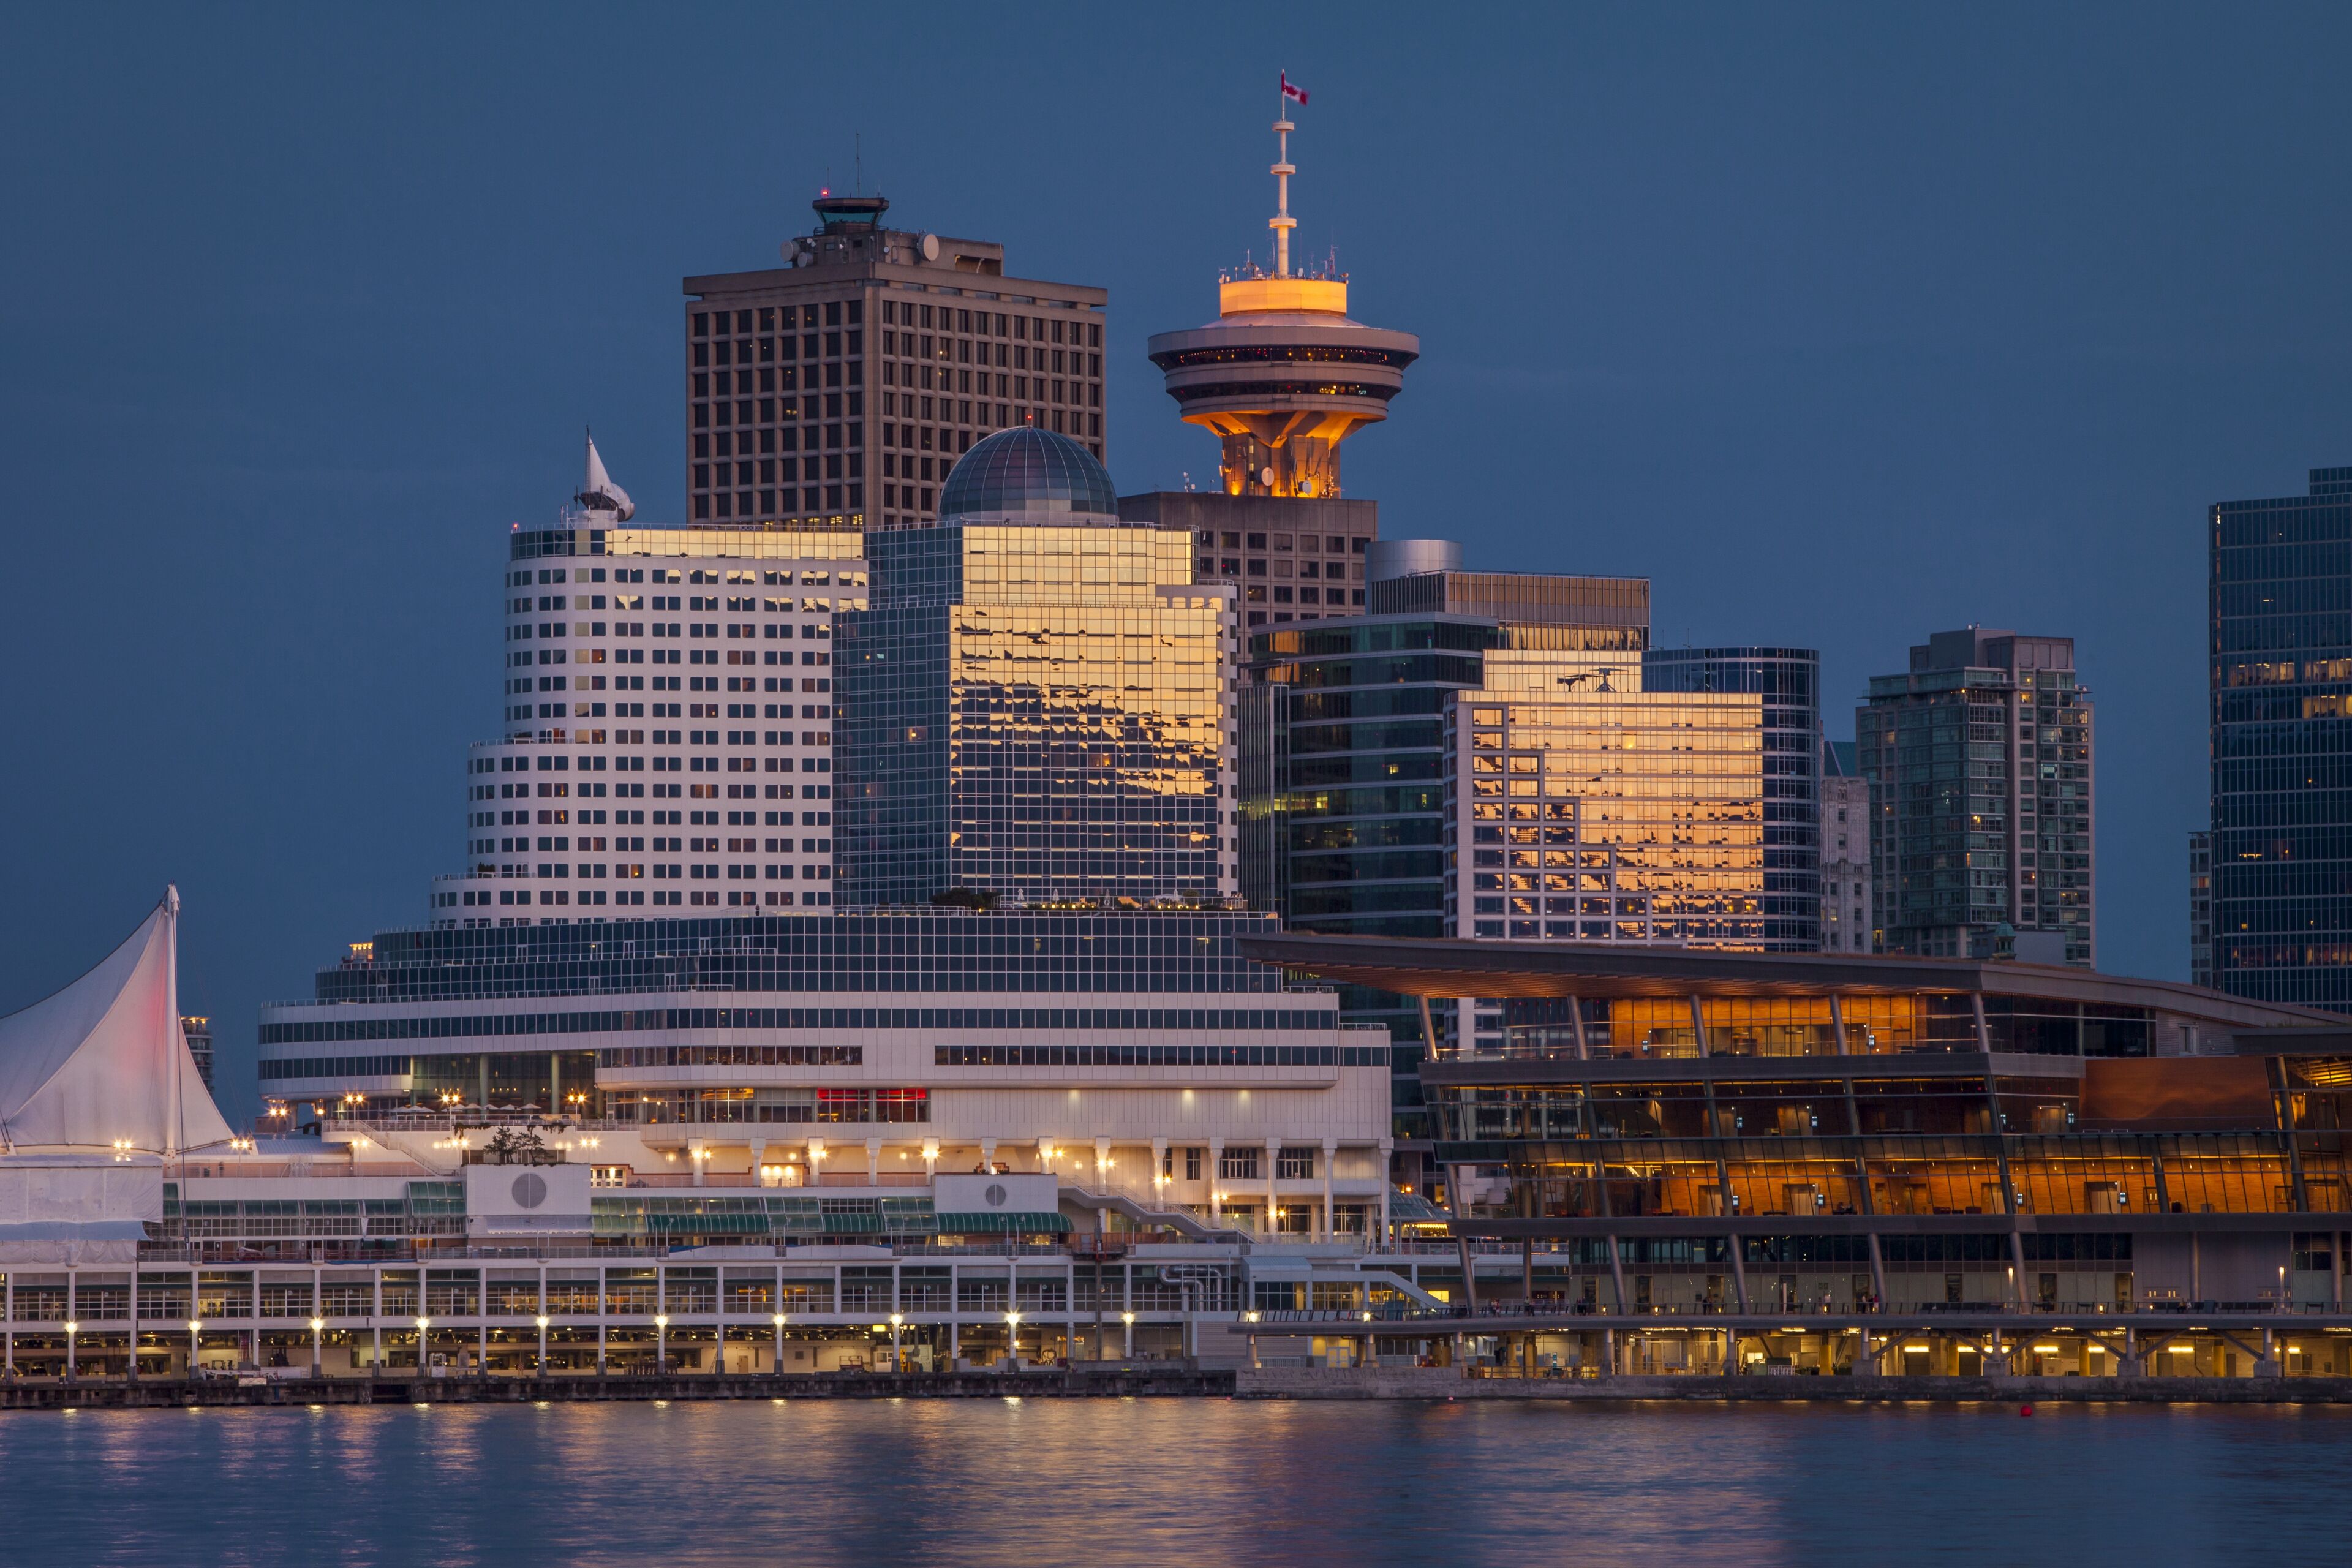 The city skyline at twilight, illuminated by lights, with a distinctive tower and reflections on the waterfront buildings.